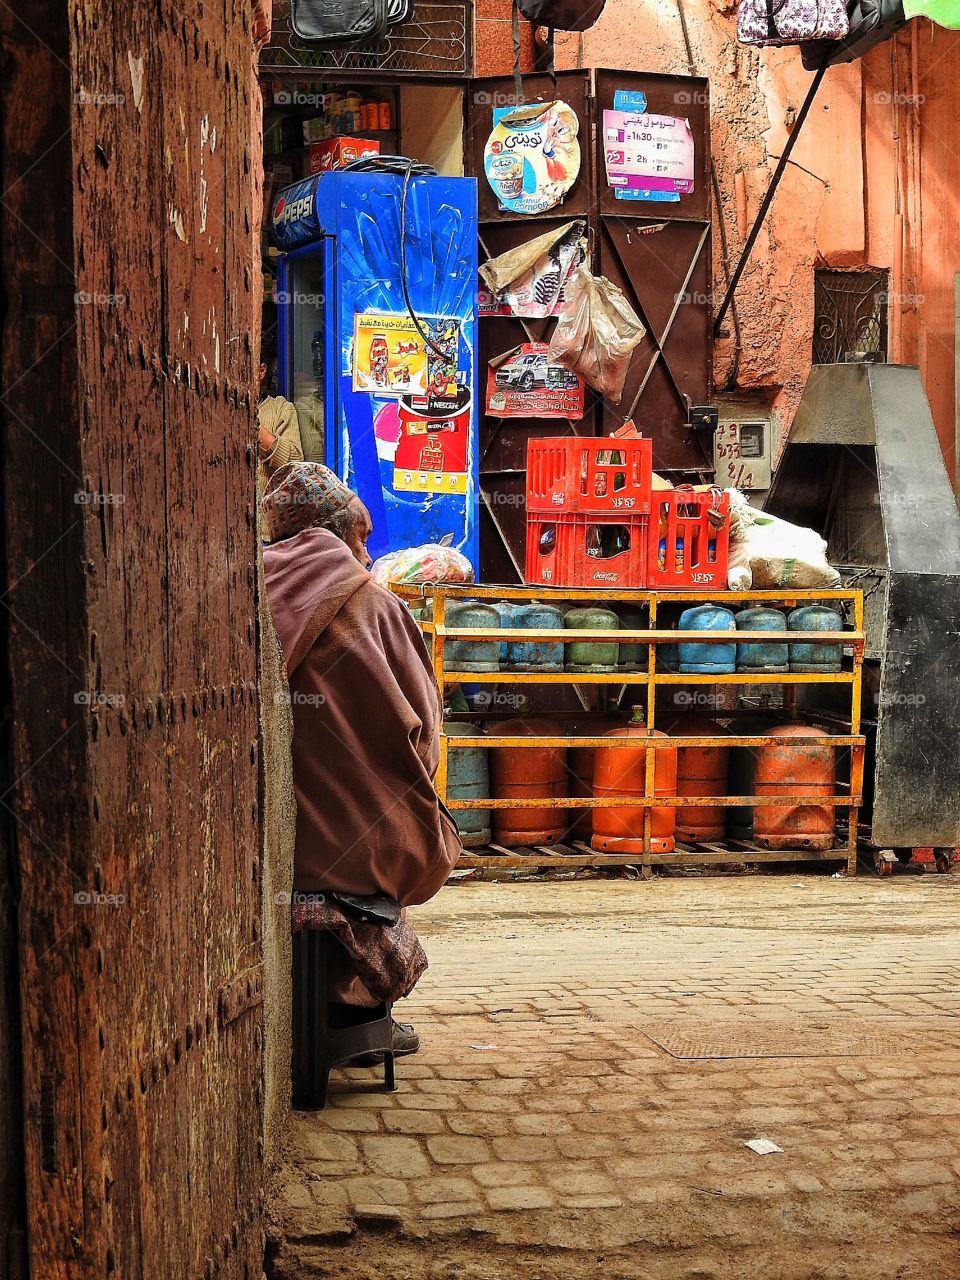 Street life in the souk